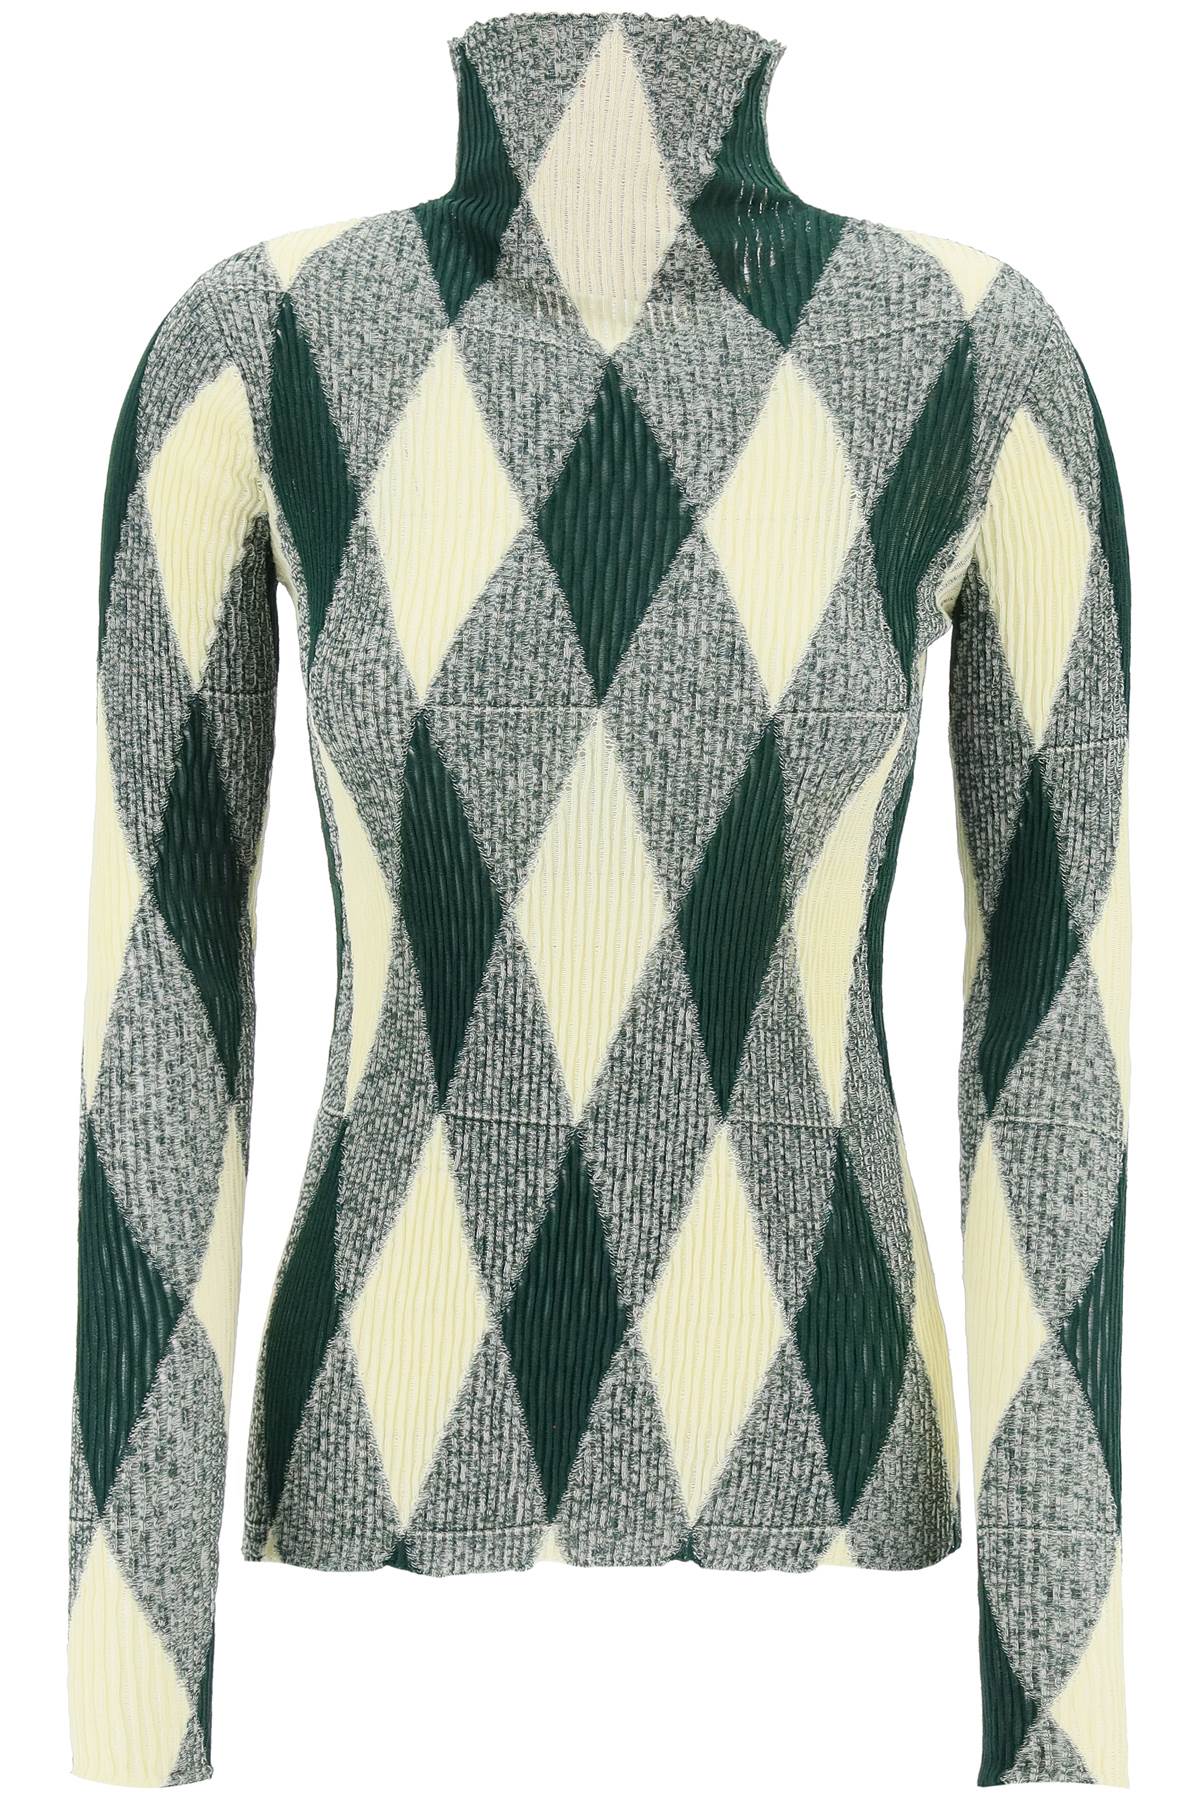 Burberry "striped cotton and silk dolcev-women > clothing > knitwear-Burberry-Urbanheer